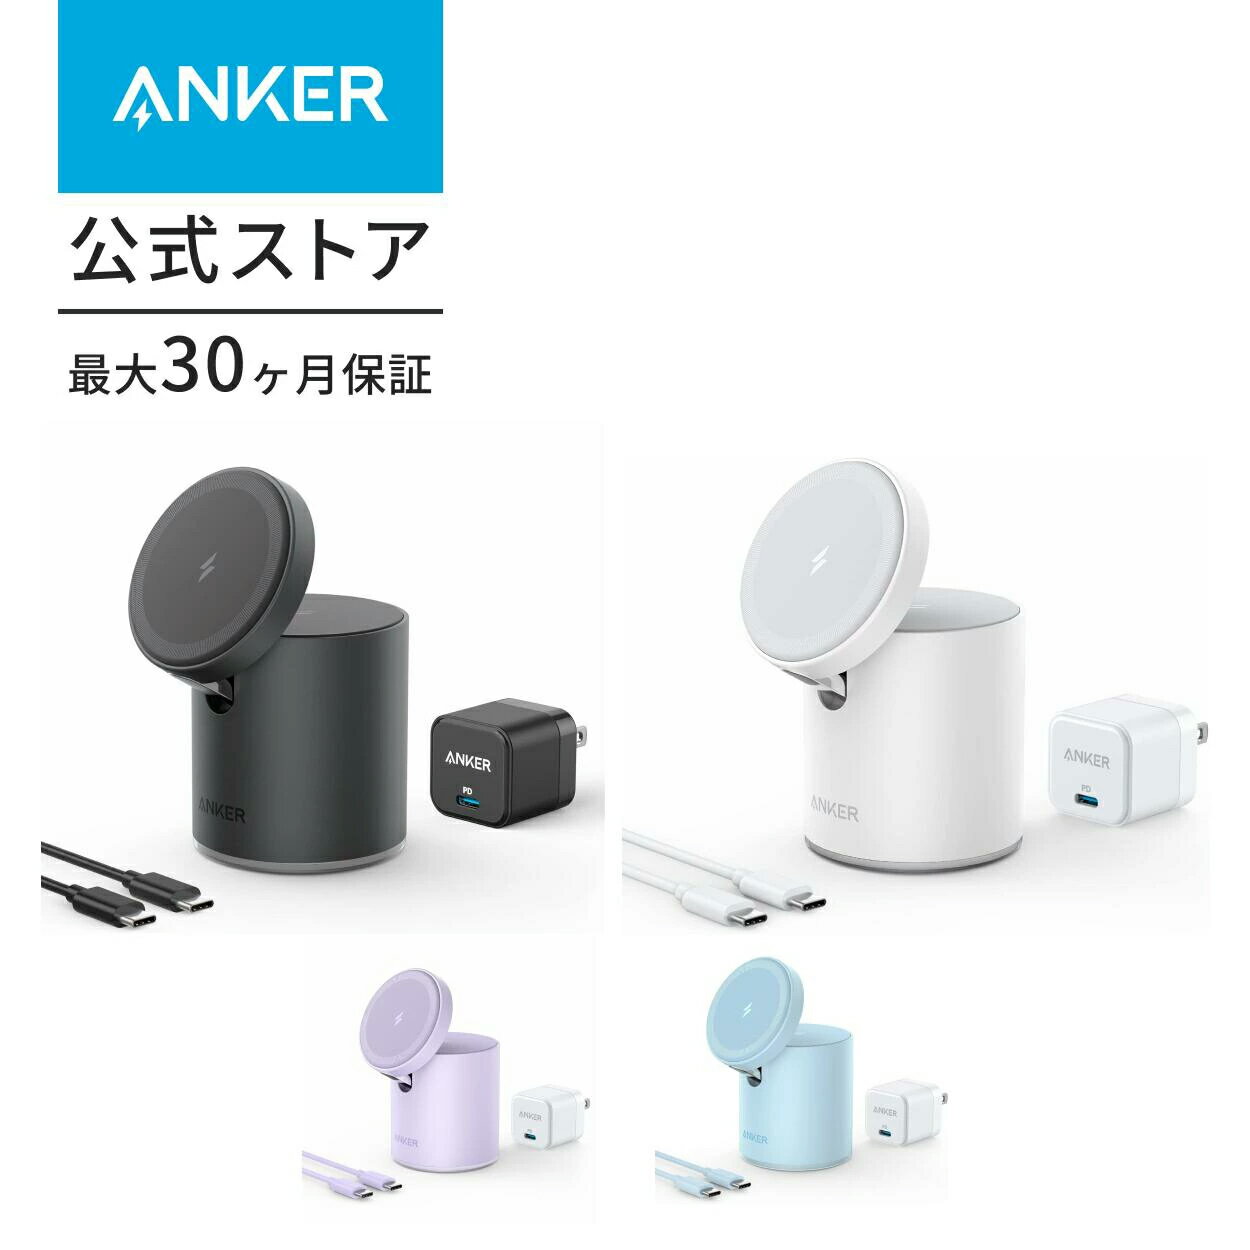 Anker 623 Magnetic Wireless Charger (MagGo)(マグネット式 2-in-1 ワイヤレス充電ステーション)【USB急速充電器付…